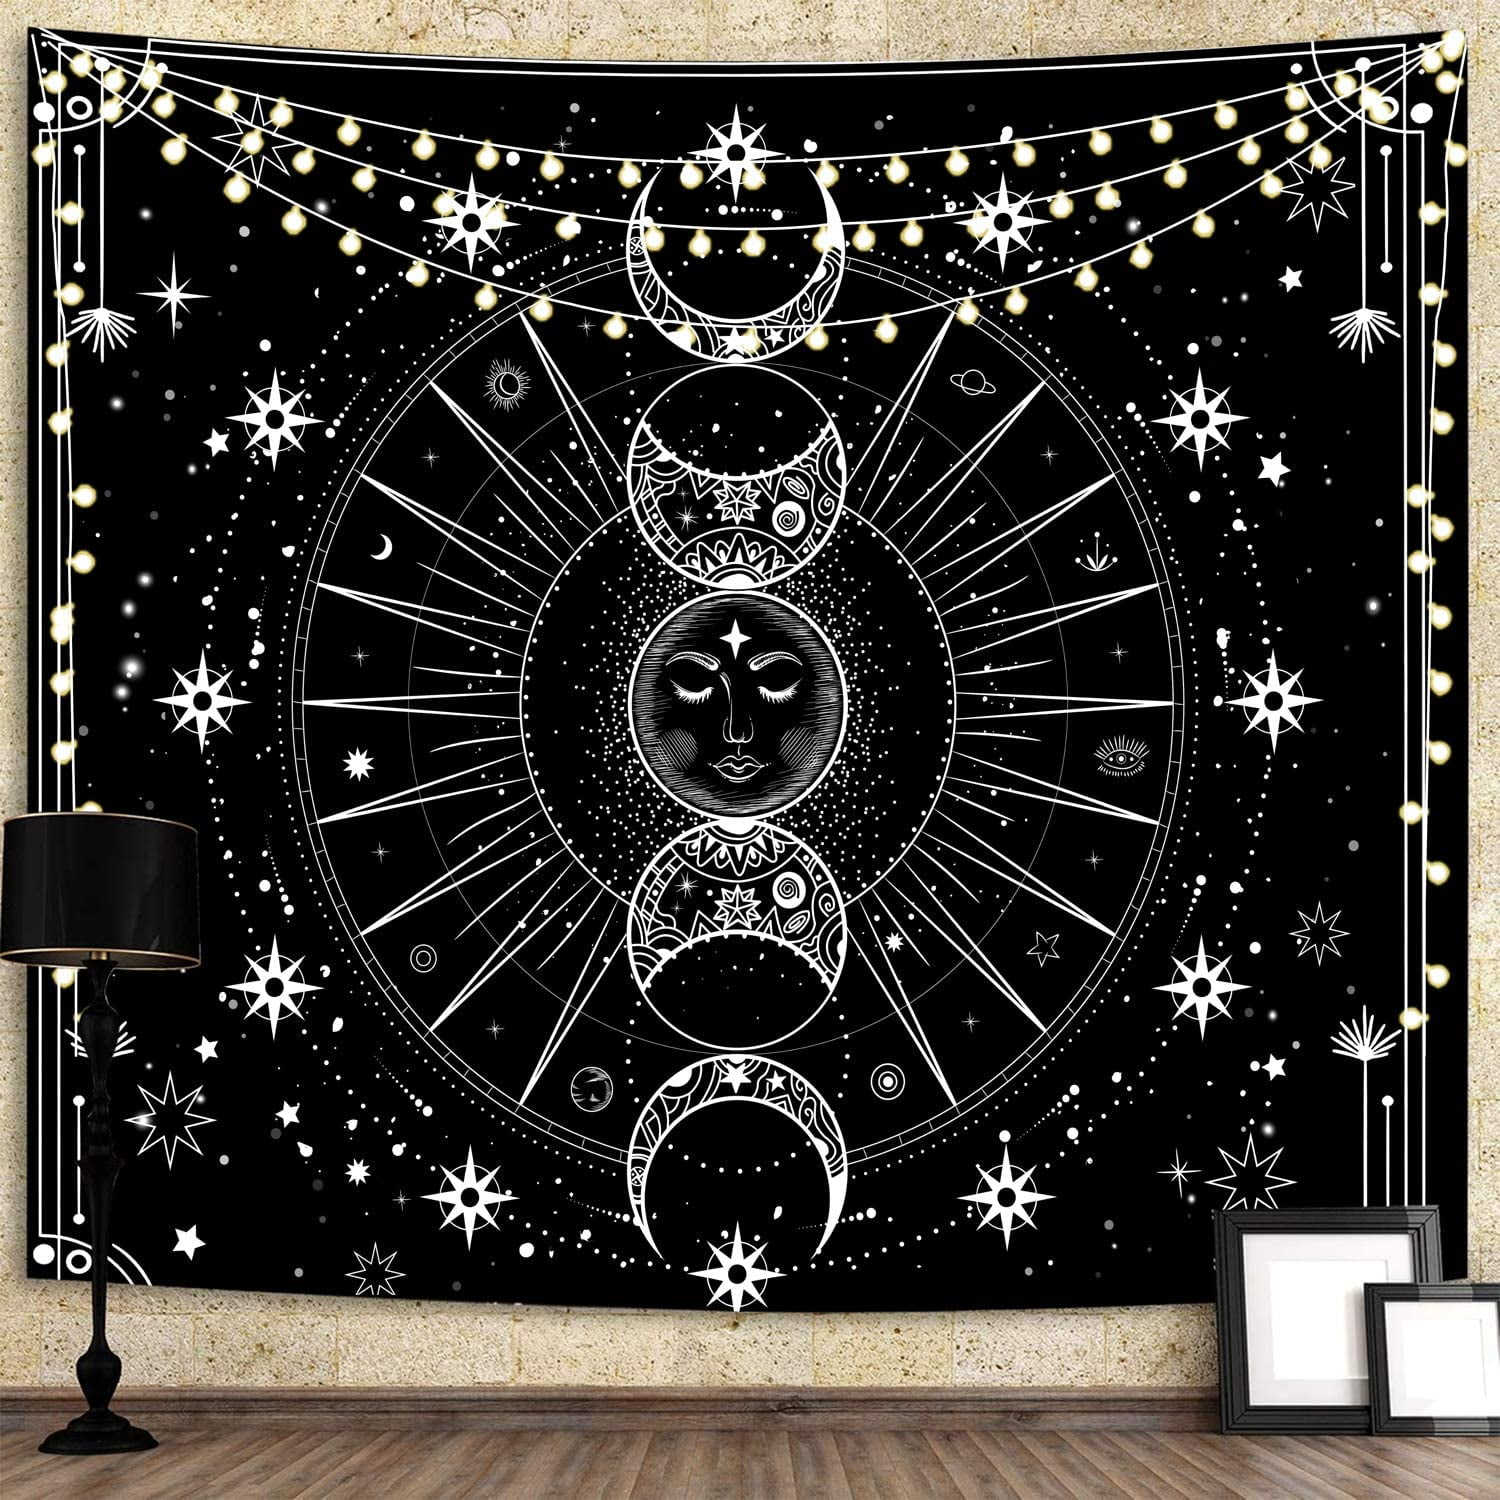 Sun and Moon Tapestry Black White Wall Hanging Art Tapestry Bohemian Home Decor 